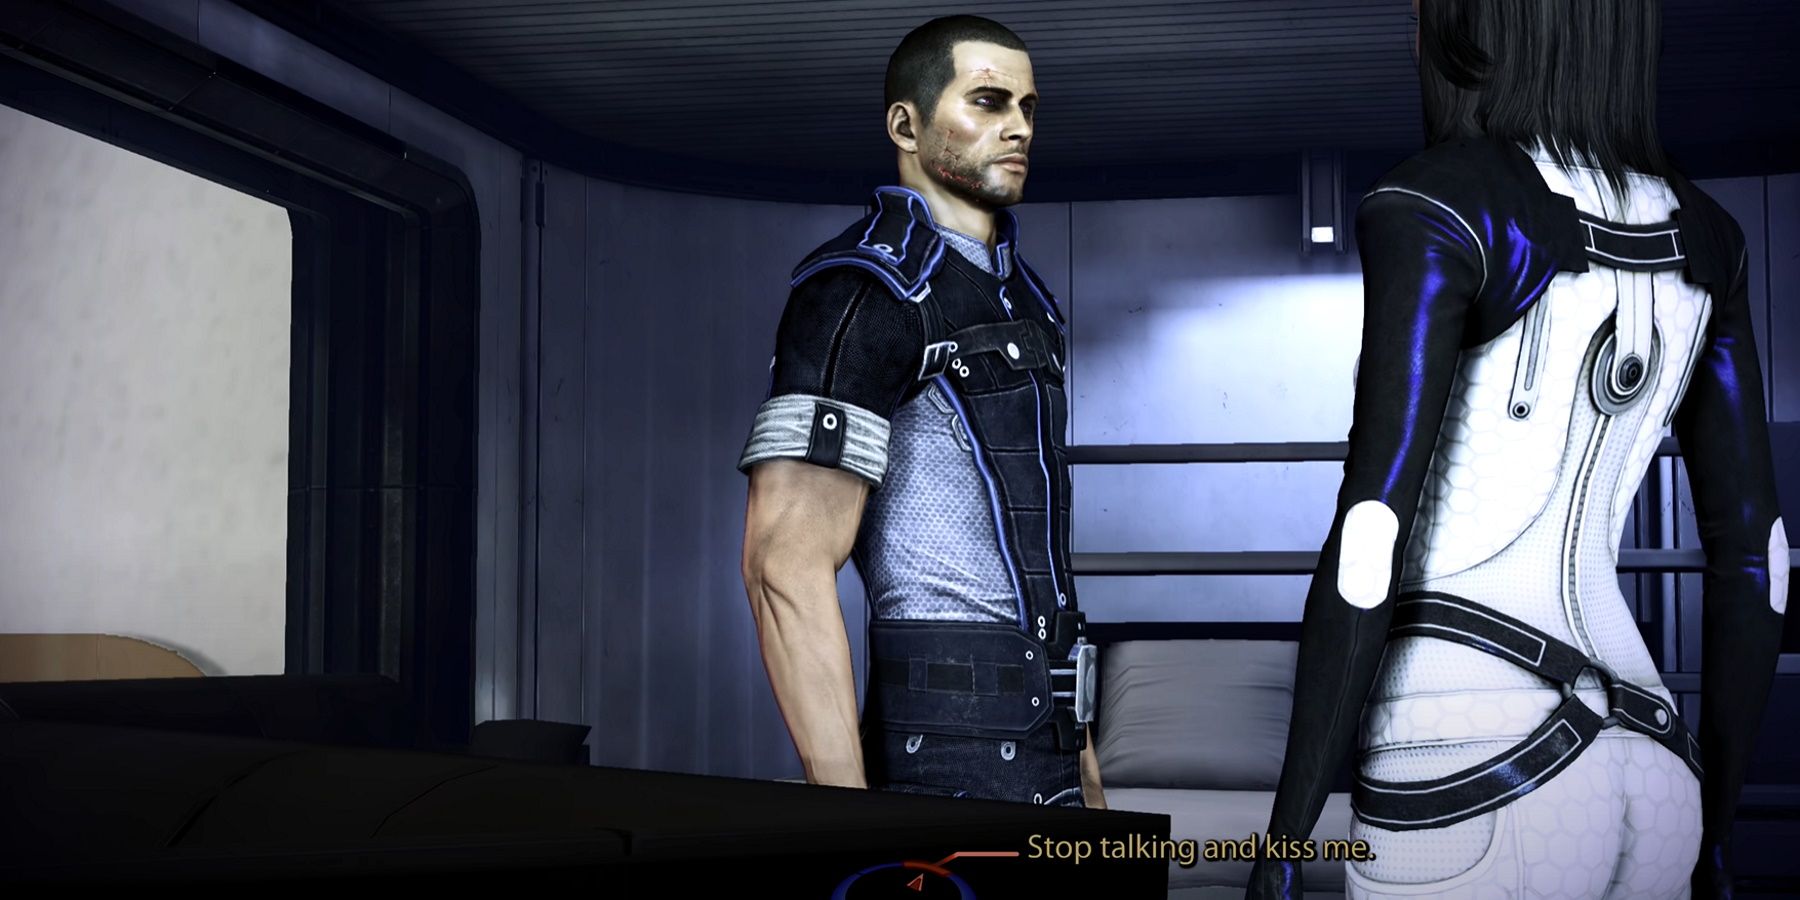 Renegade Male Shepard and Miranda on the Citadel in Mass Effect 3